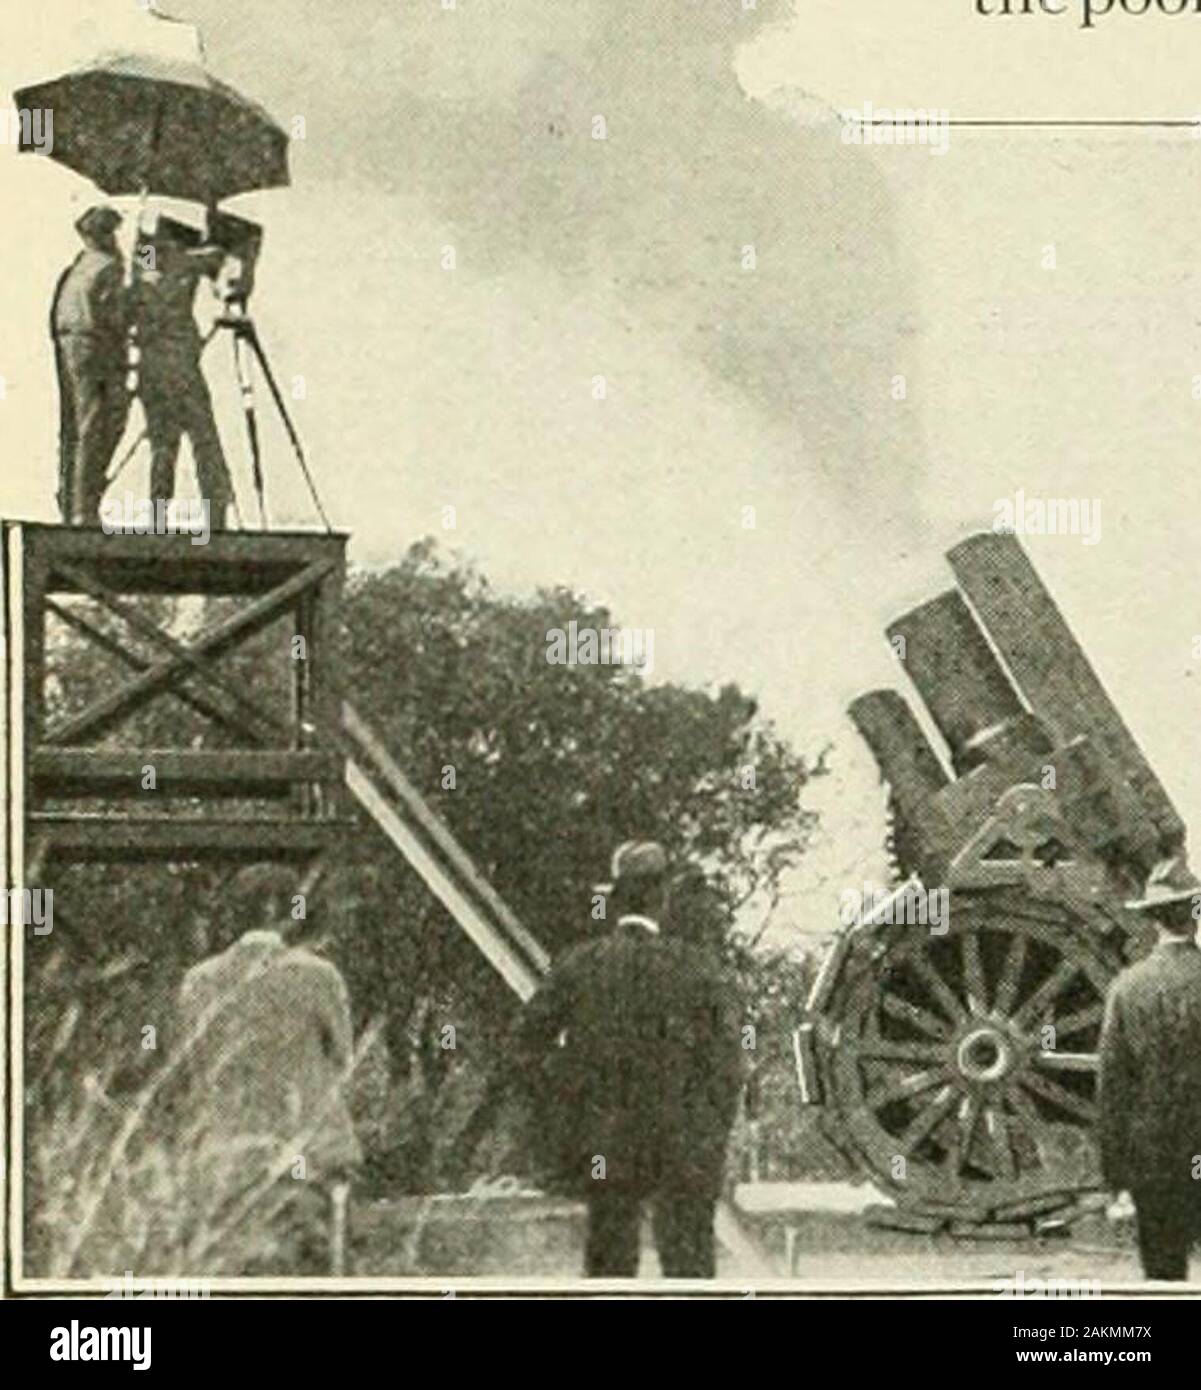 Popular science monthly . attempt in imitating the 12-inch siegehowitzers employed by the Germans.The huge guns are constructed almostentirely of wood which is supplementedat all wearing points with metal. Theguns follow the well known Krupp designfaithfully. A recoil mechanism is pro-vided as well as a means for regulatingthe angle of the gun barrel. The wheelsare provided withcaterpillar treads toenable them to climbover rough ground.The powder chargeused in firing is mixedcarefully in thestudio laboratory.In making the pic-ture the guns aredrawn from the pointon the firing linebyatractordri Stock Photo